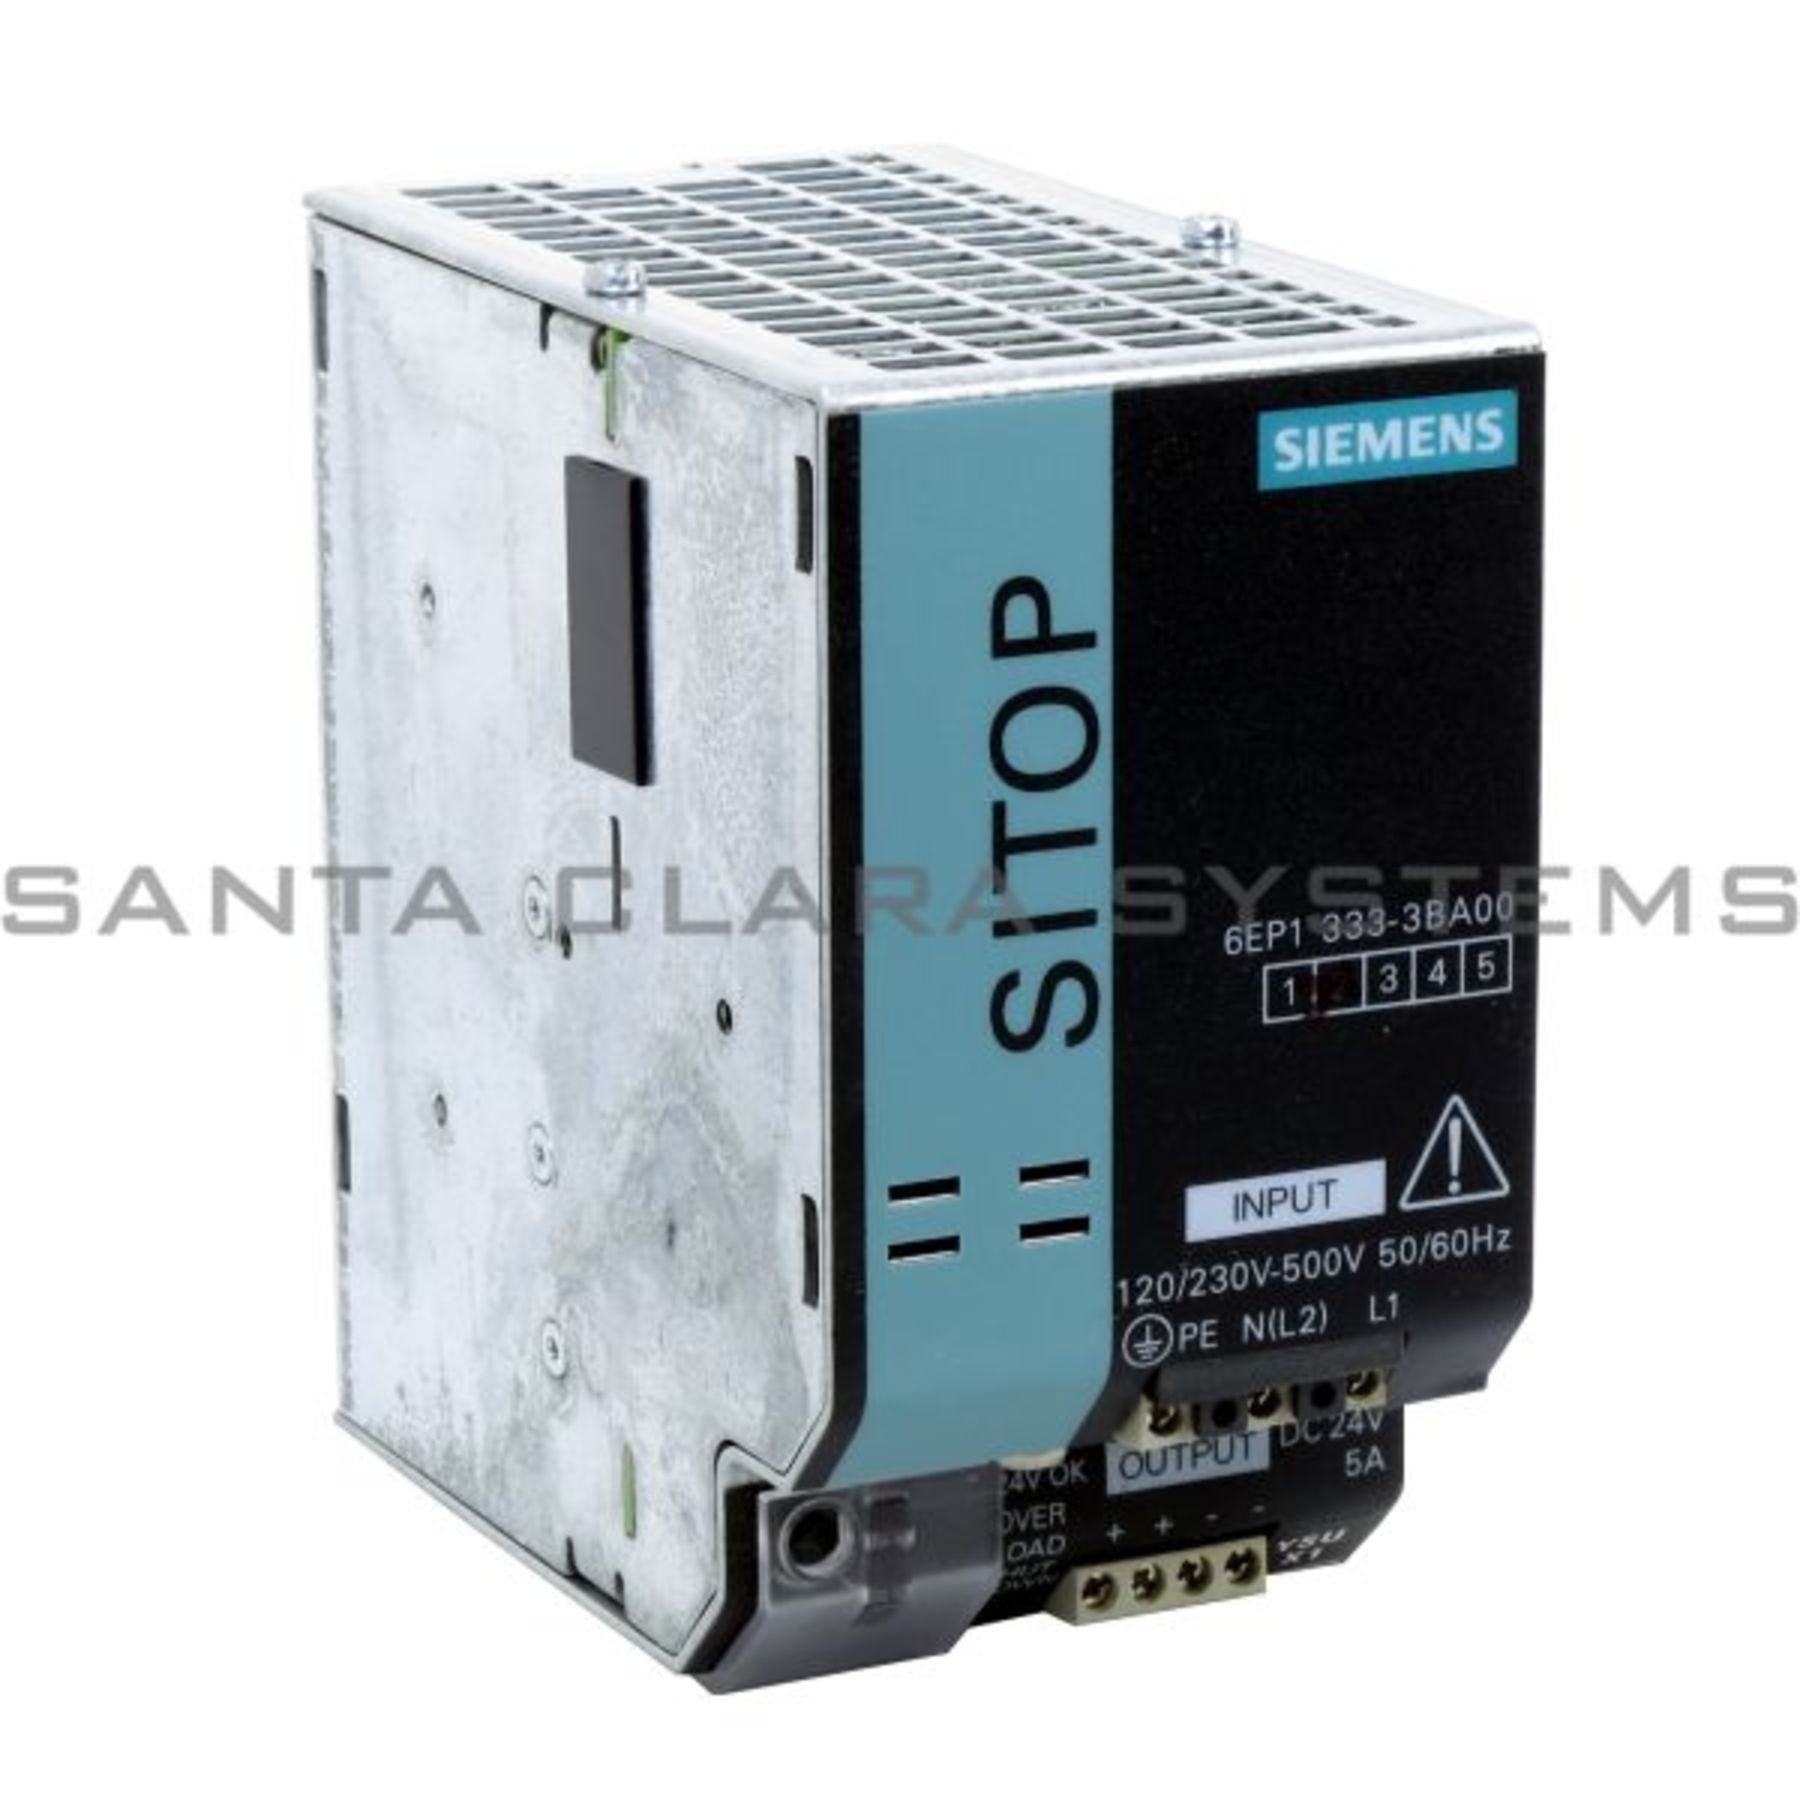 6EP13333BA00 Industrial Control System for sale online Siemens 6EP1333-3BA00 